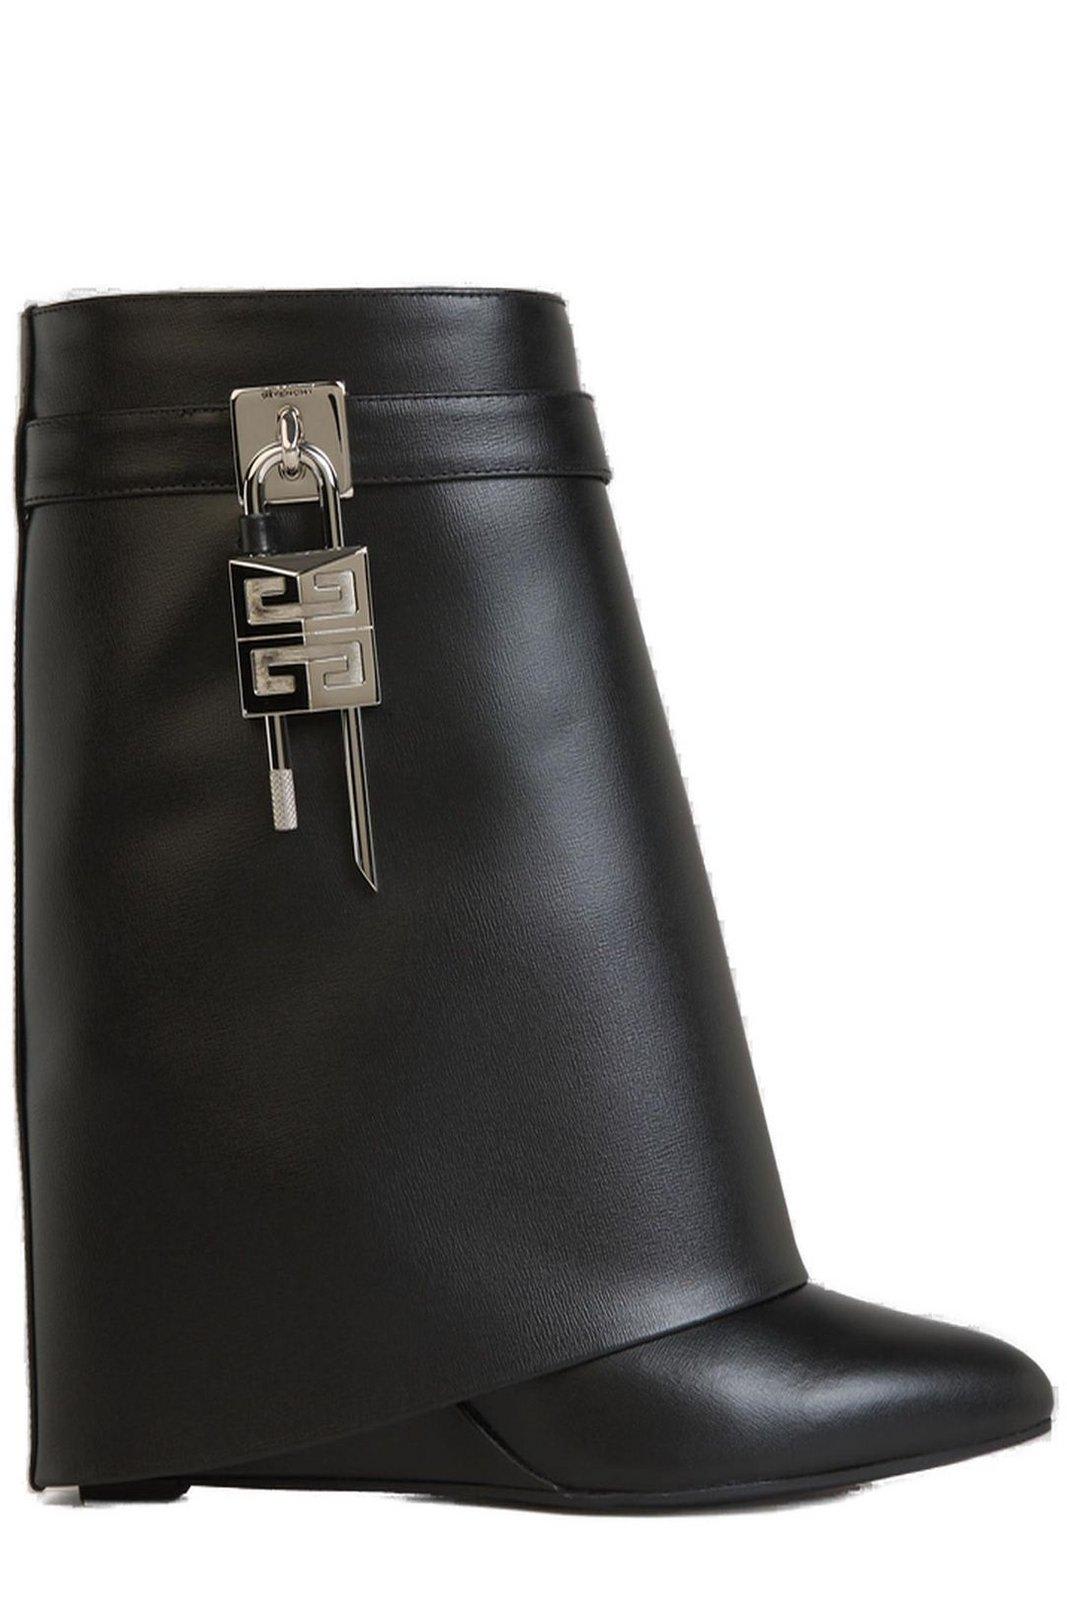 GIVENCHY SHARK LOCK ANKLE BOOTS